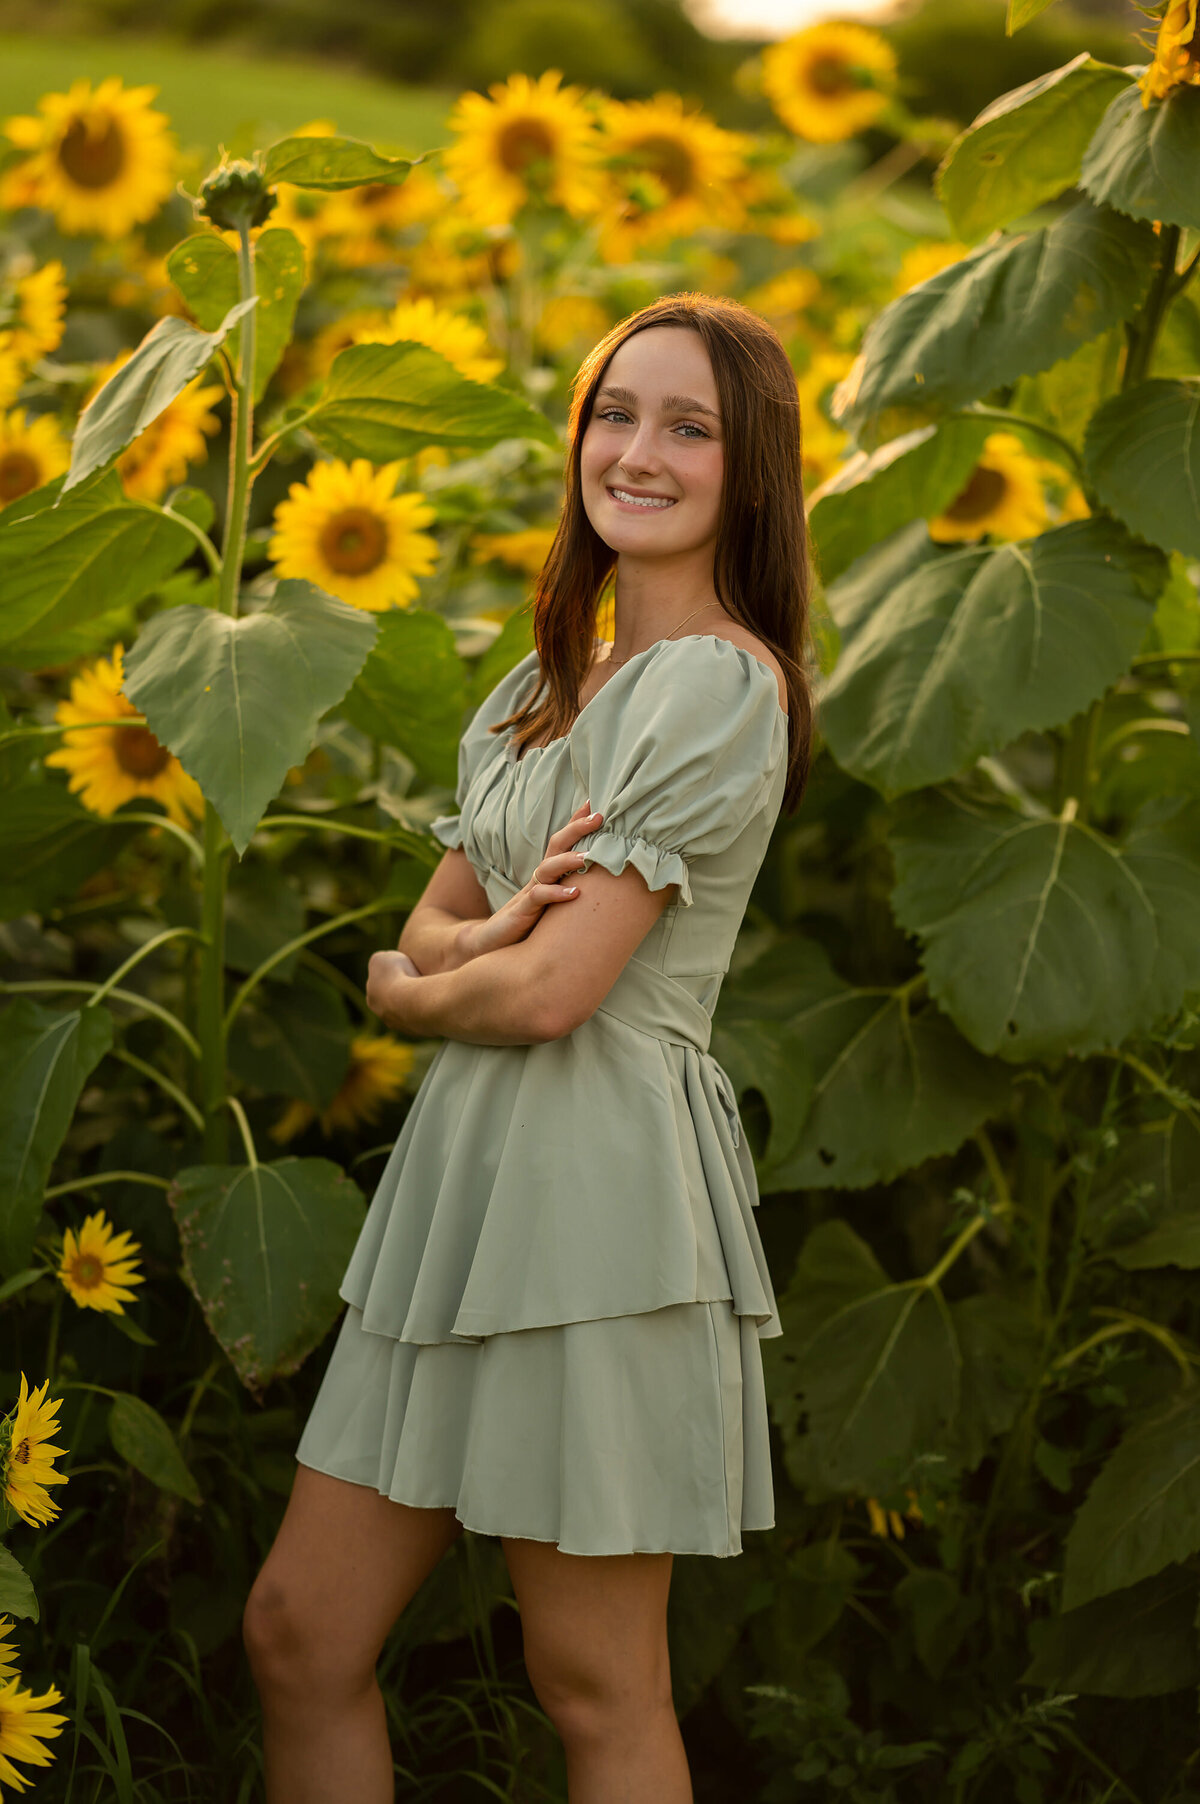 A student from Arrowhead High School has her portrait taken in a field of sunflowers located in Sussex WI.